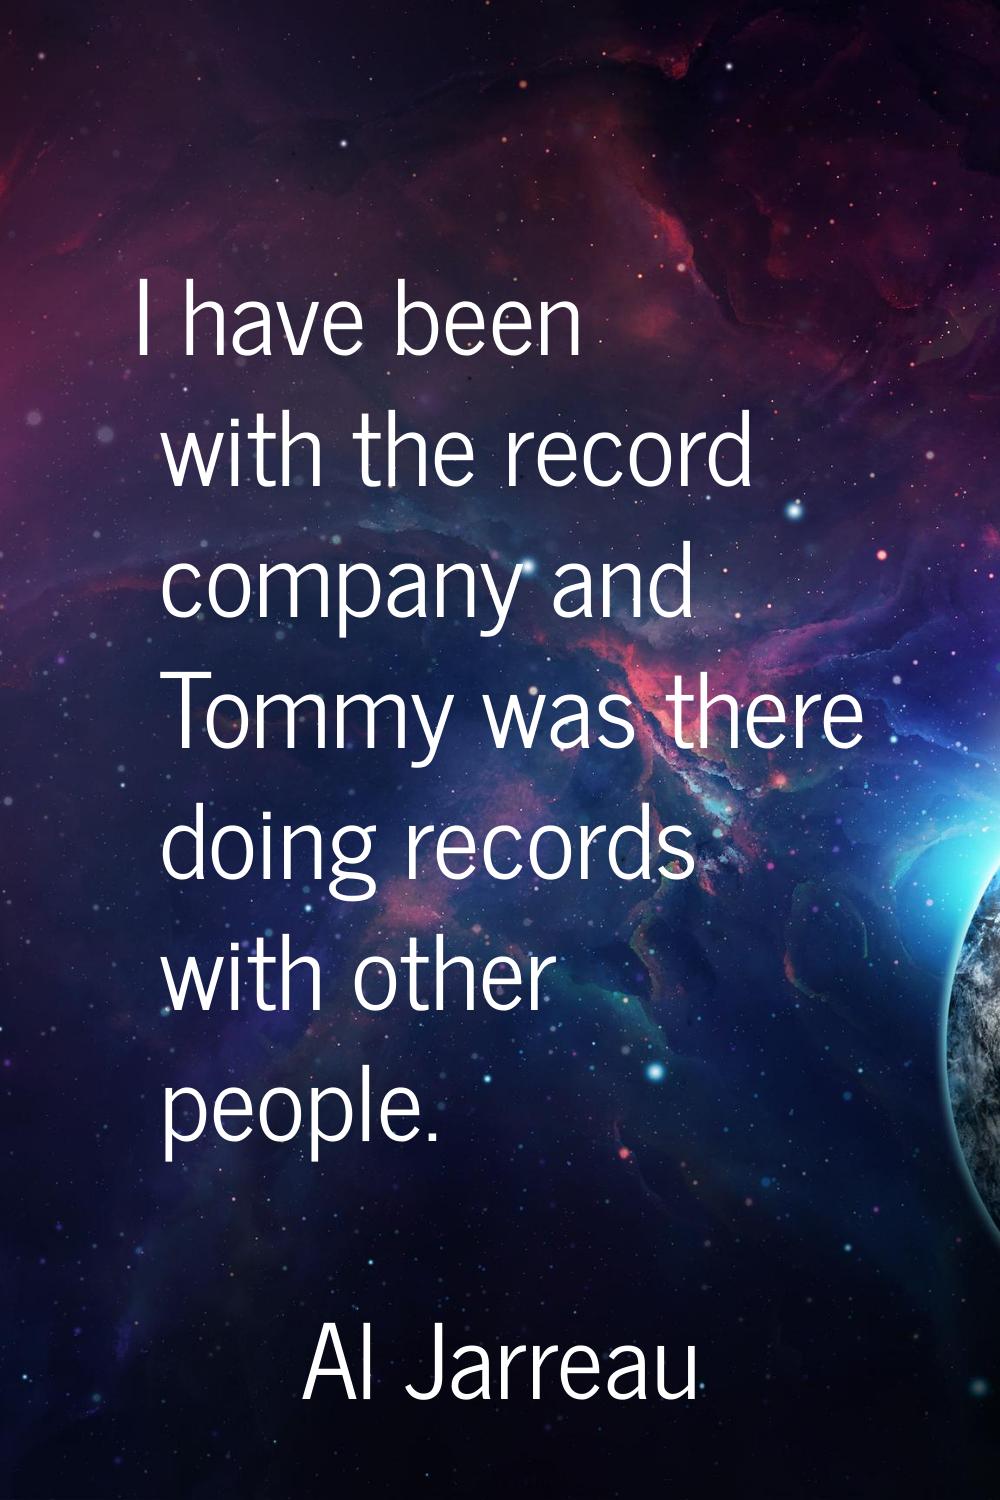 I have been with the record company and Tommy was there doing records with other people.